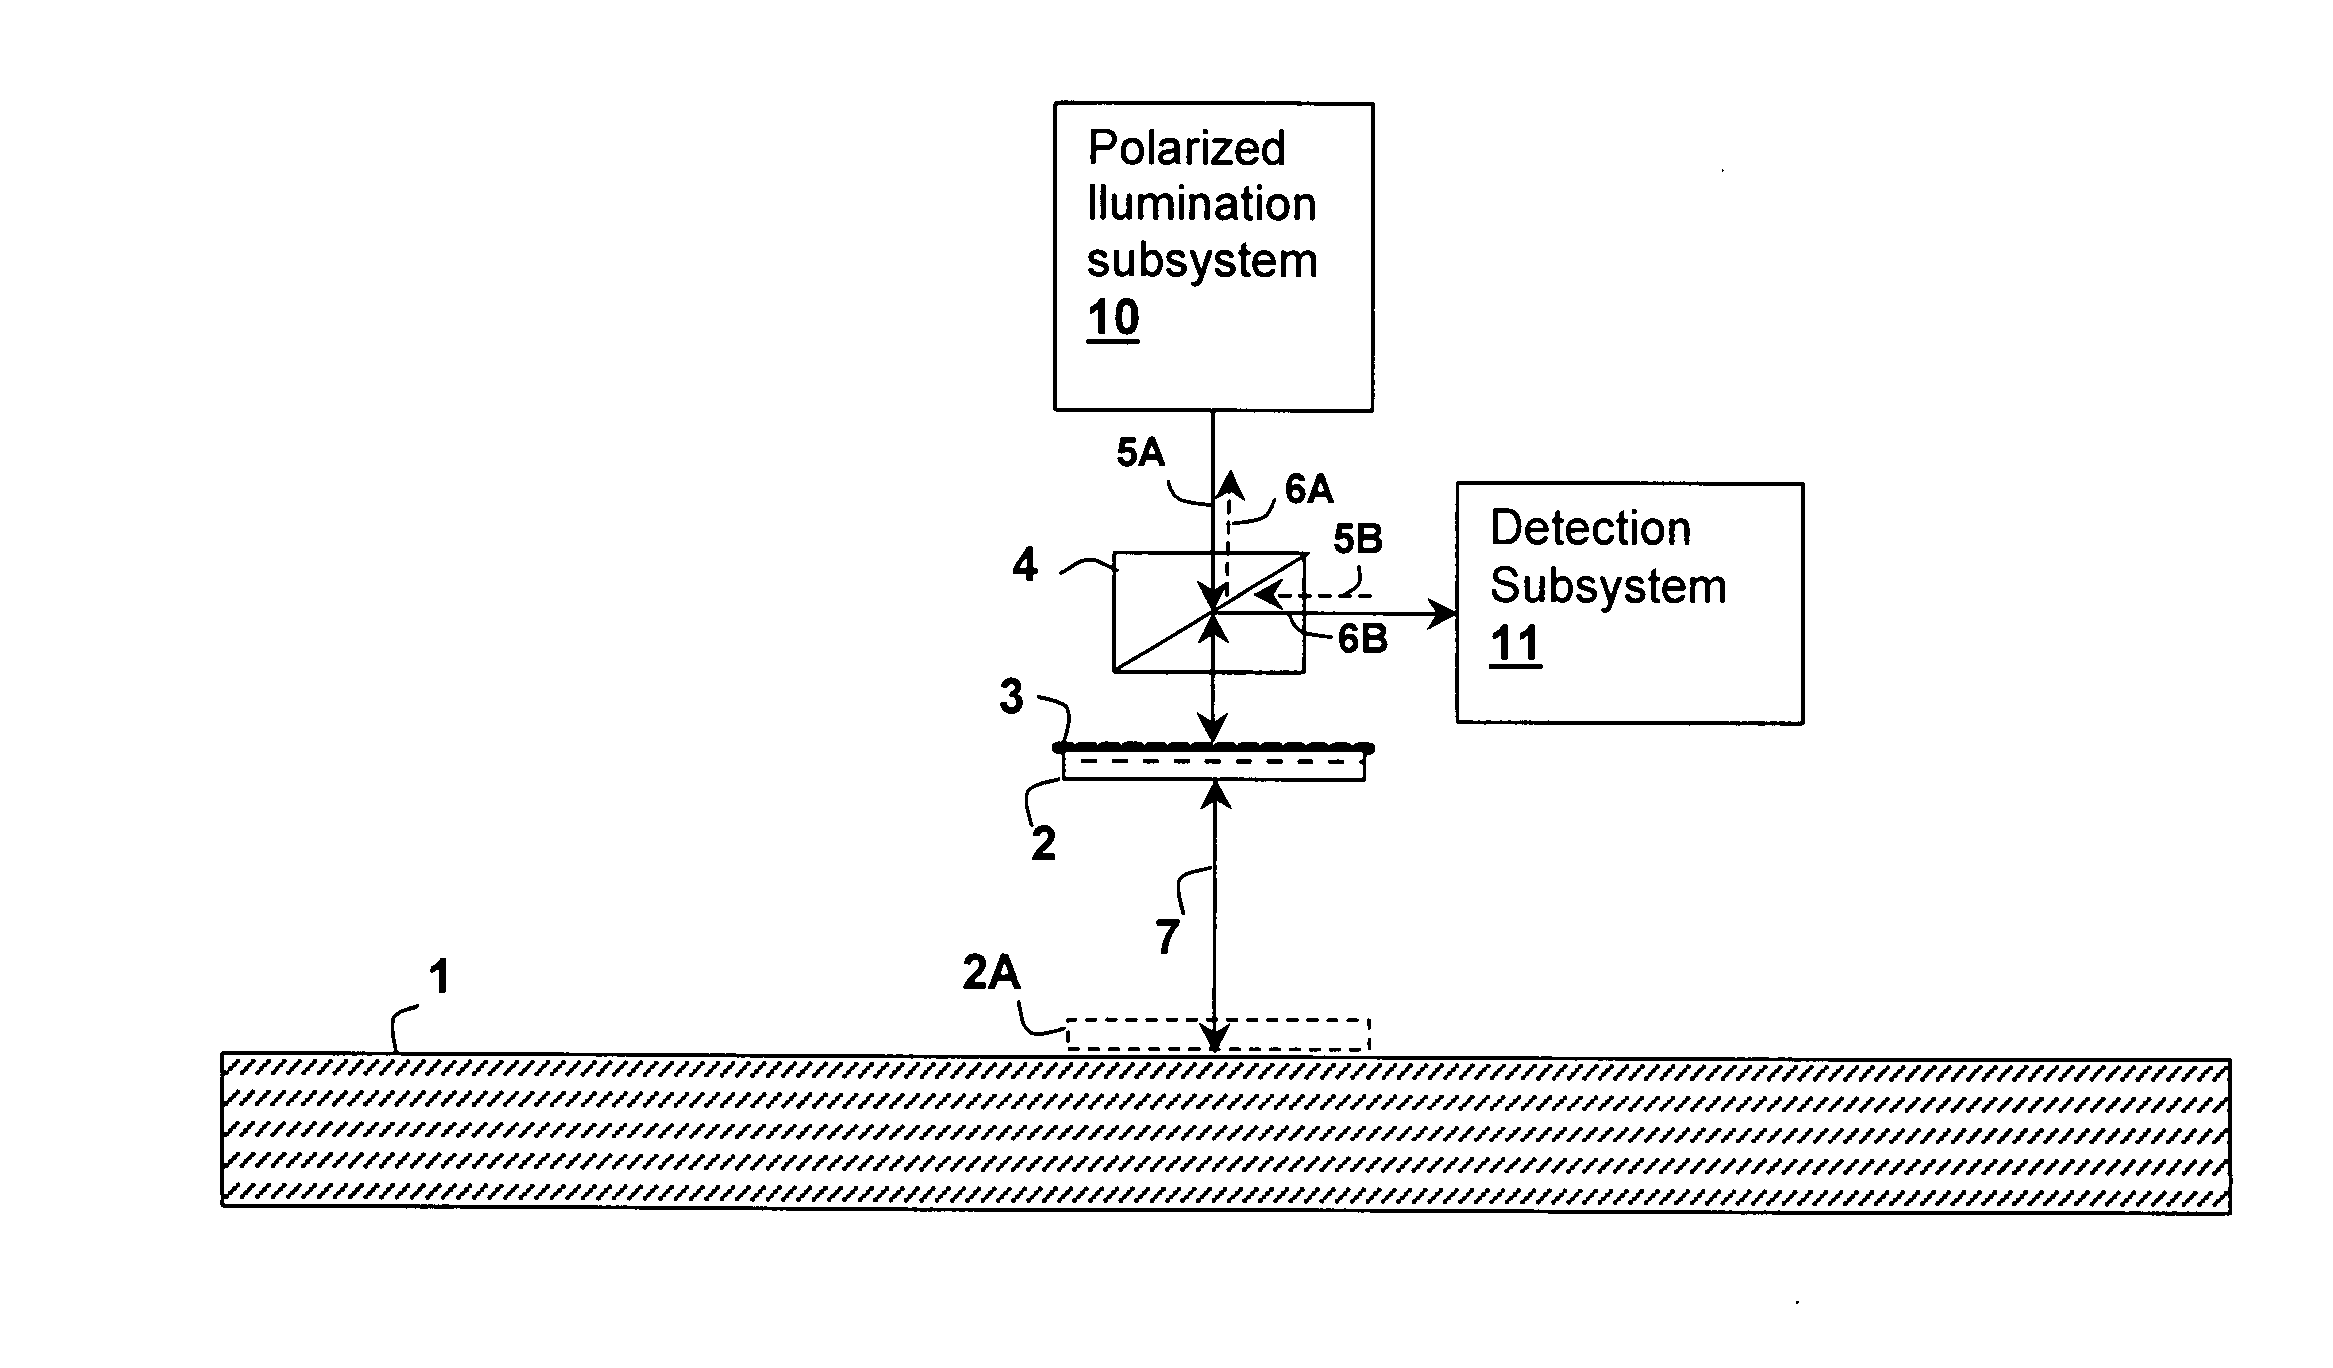 Fabry-perot resonator apparatus and method including an in-resonator polarizing element